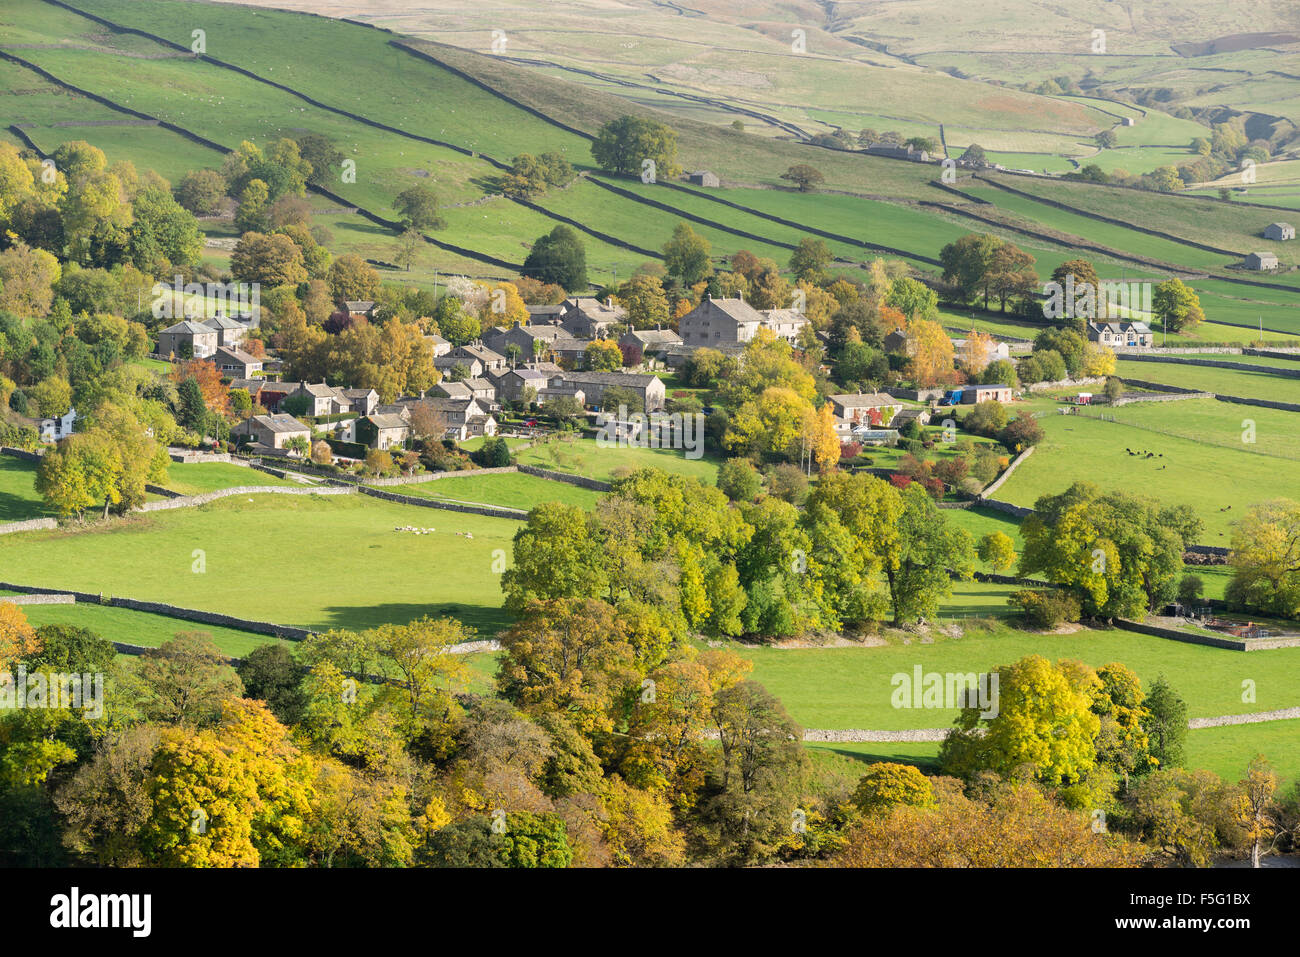 Appletreewick Dorf in Wharfedale, The Yorkshire Dales, England. Stockfoto